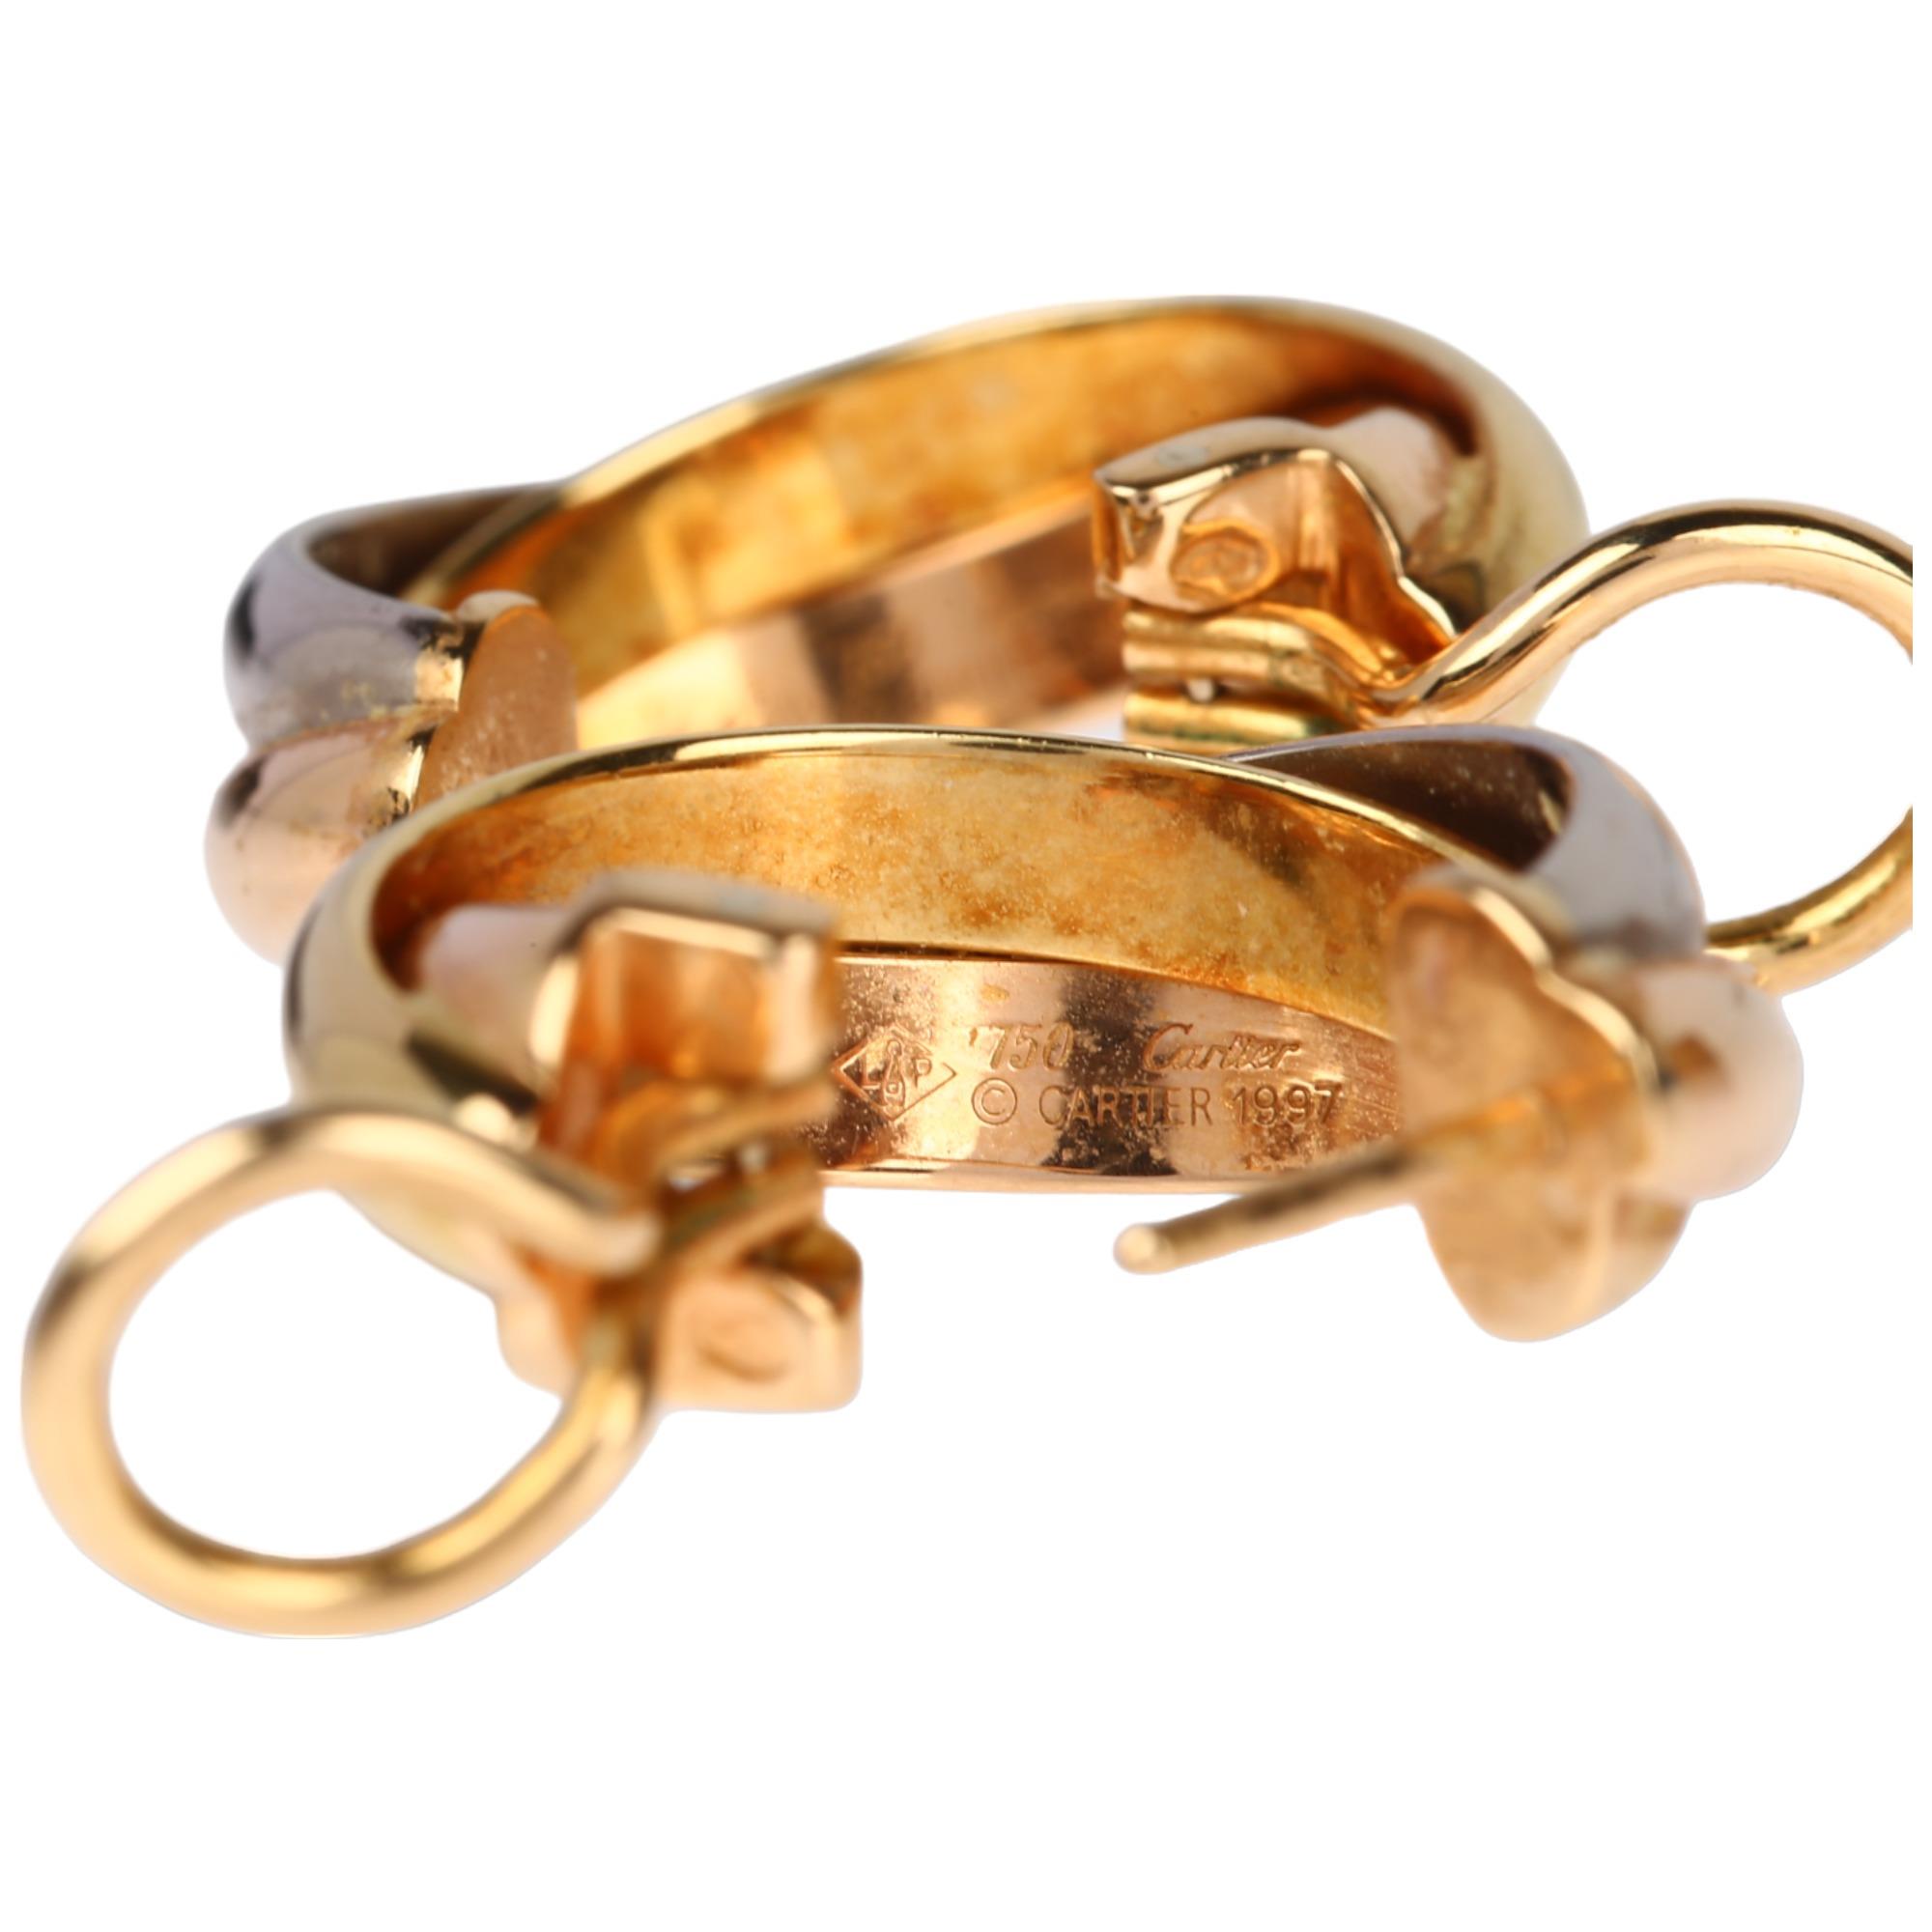 CARTIER - a pair of 18ct three-colour gold Trinity hoop earrings, with English lock fittings, signed - Image 3 of 4